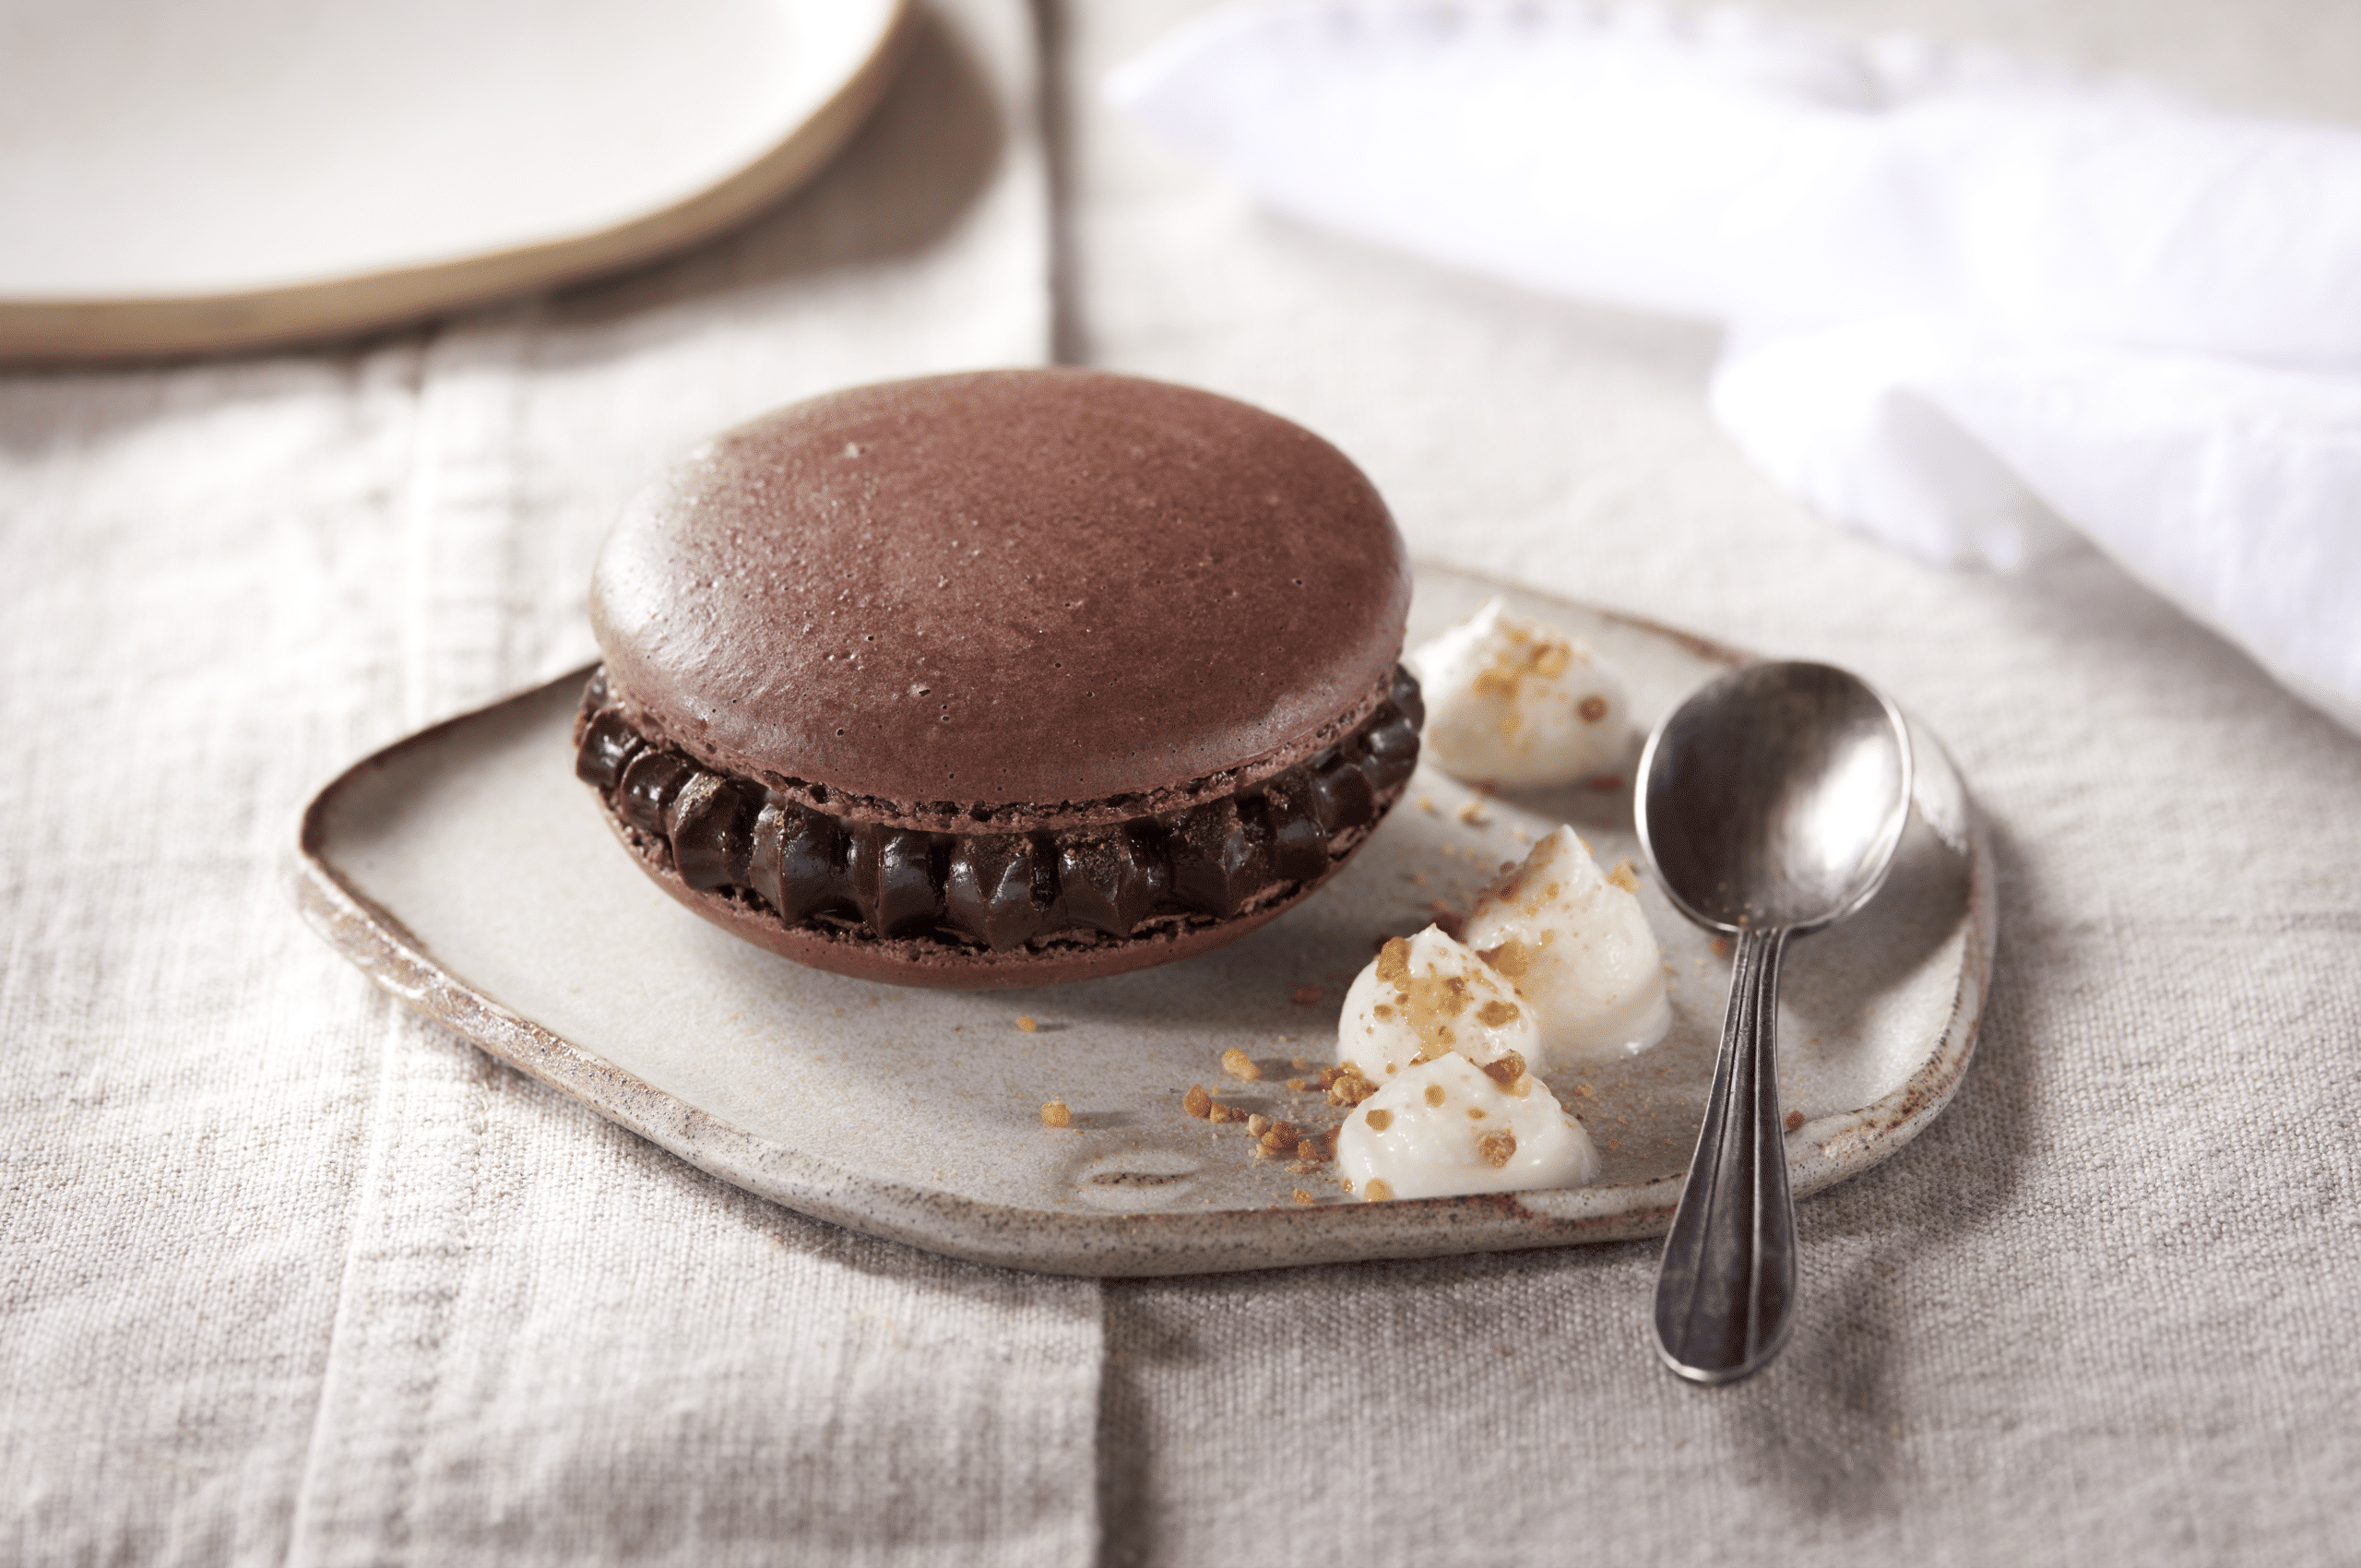 Macaron chocolat praline Mag'm frozen bakery products onore group